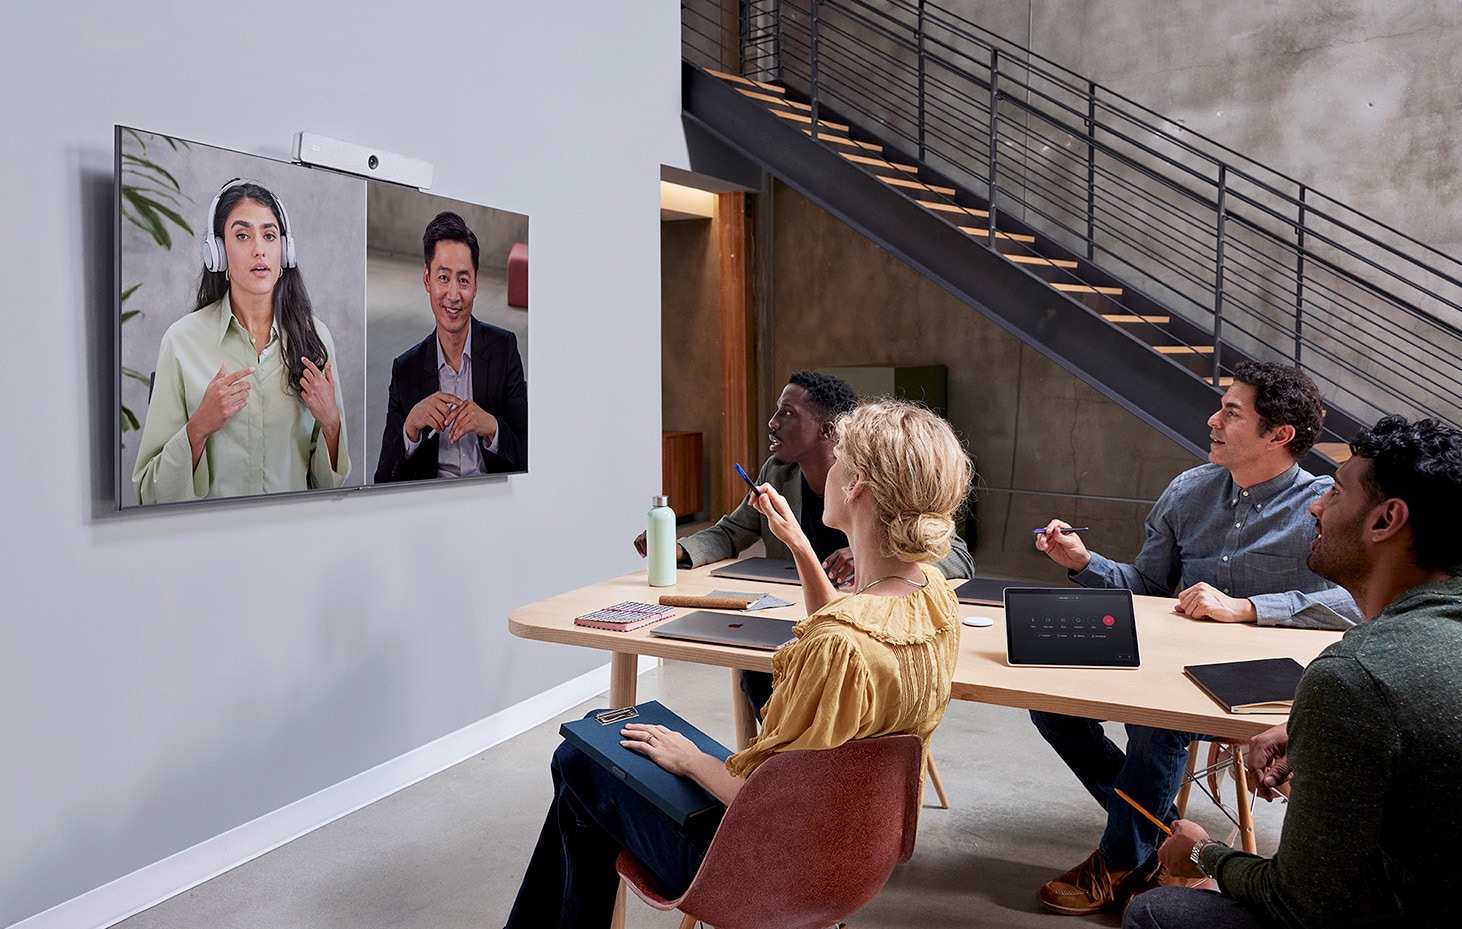 Webex Room Bar paired with dual flat screen displays for video meeting and content sharing in a mid-sized meeting room